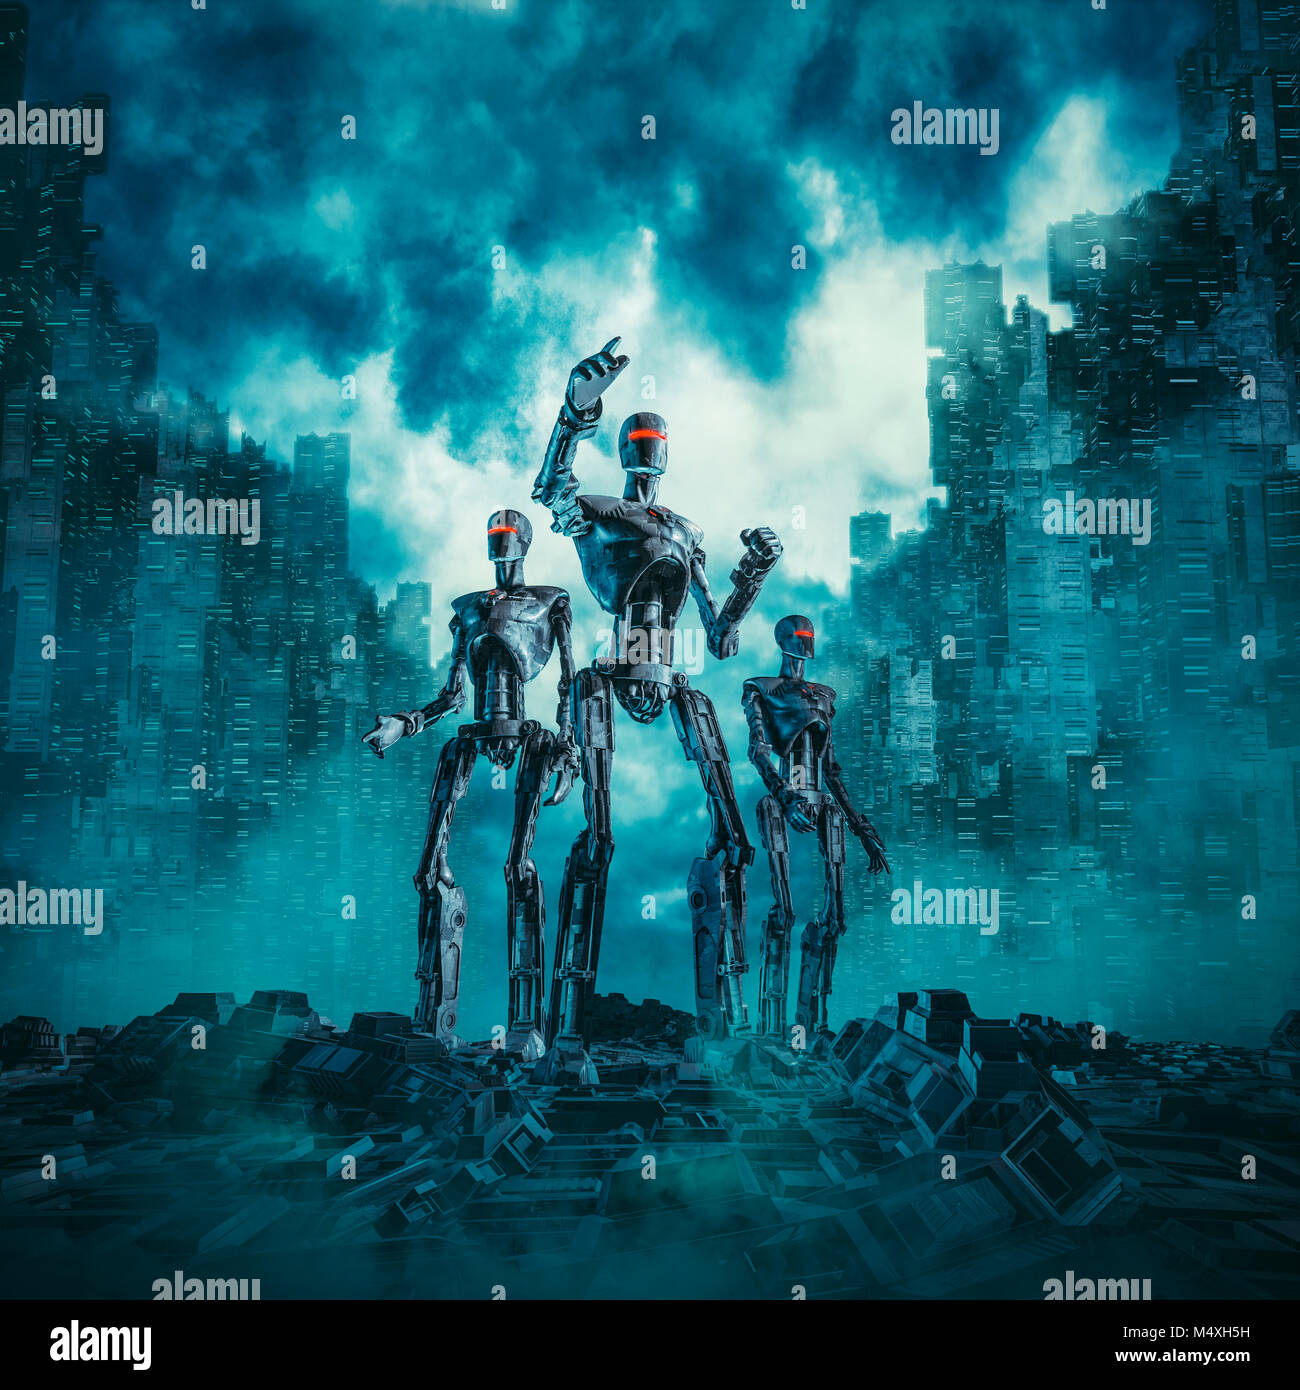 Robots on patrol / 3D illustration of science fiction scene with three military robots searching ruins of futuristic dystopian city Stock Photo